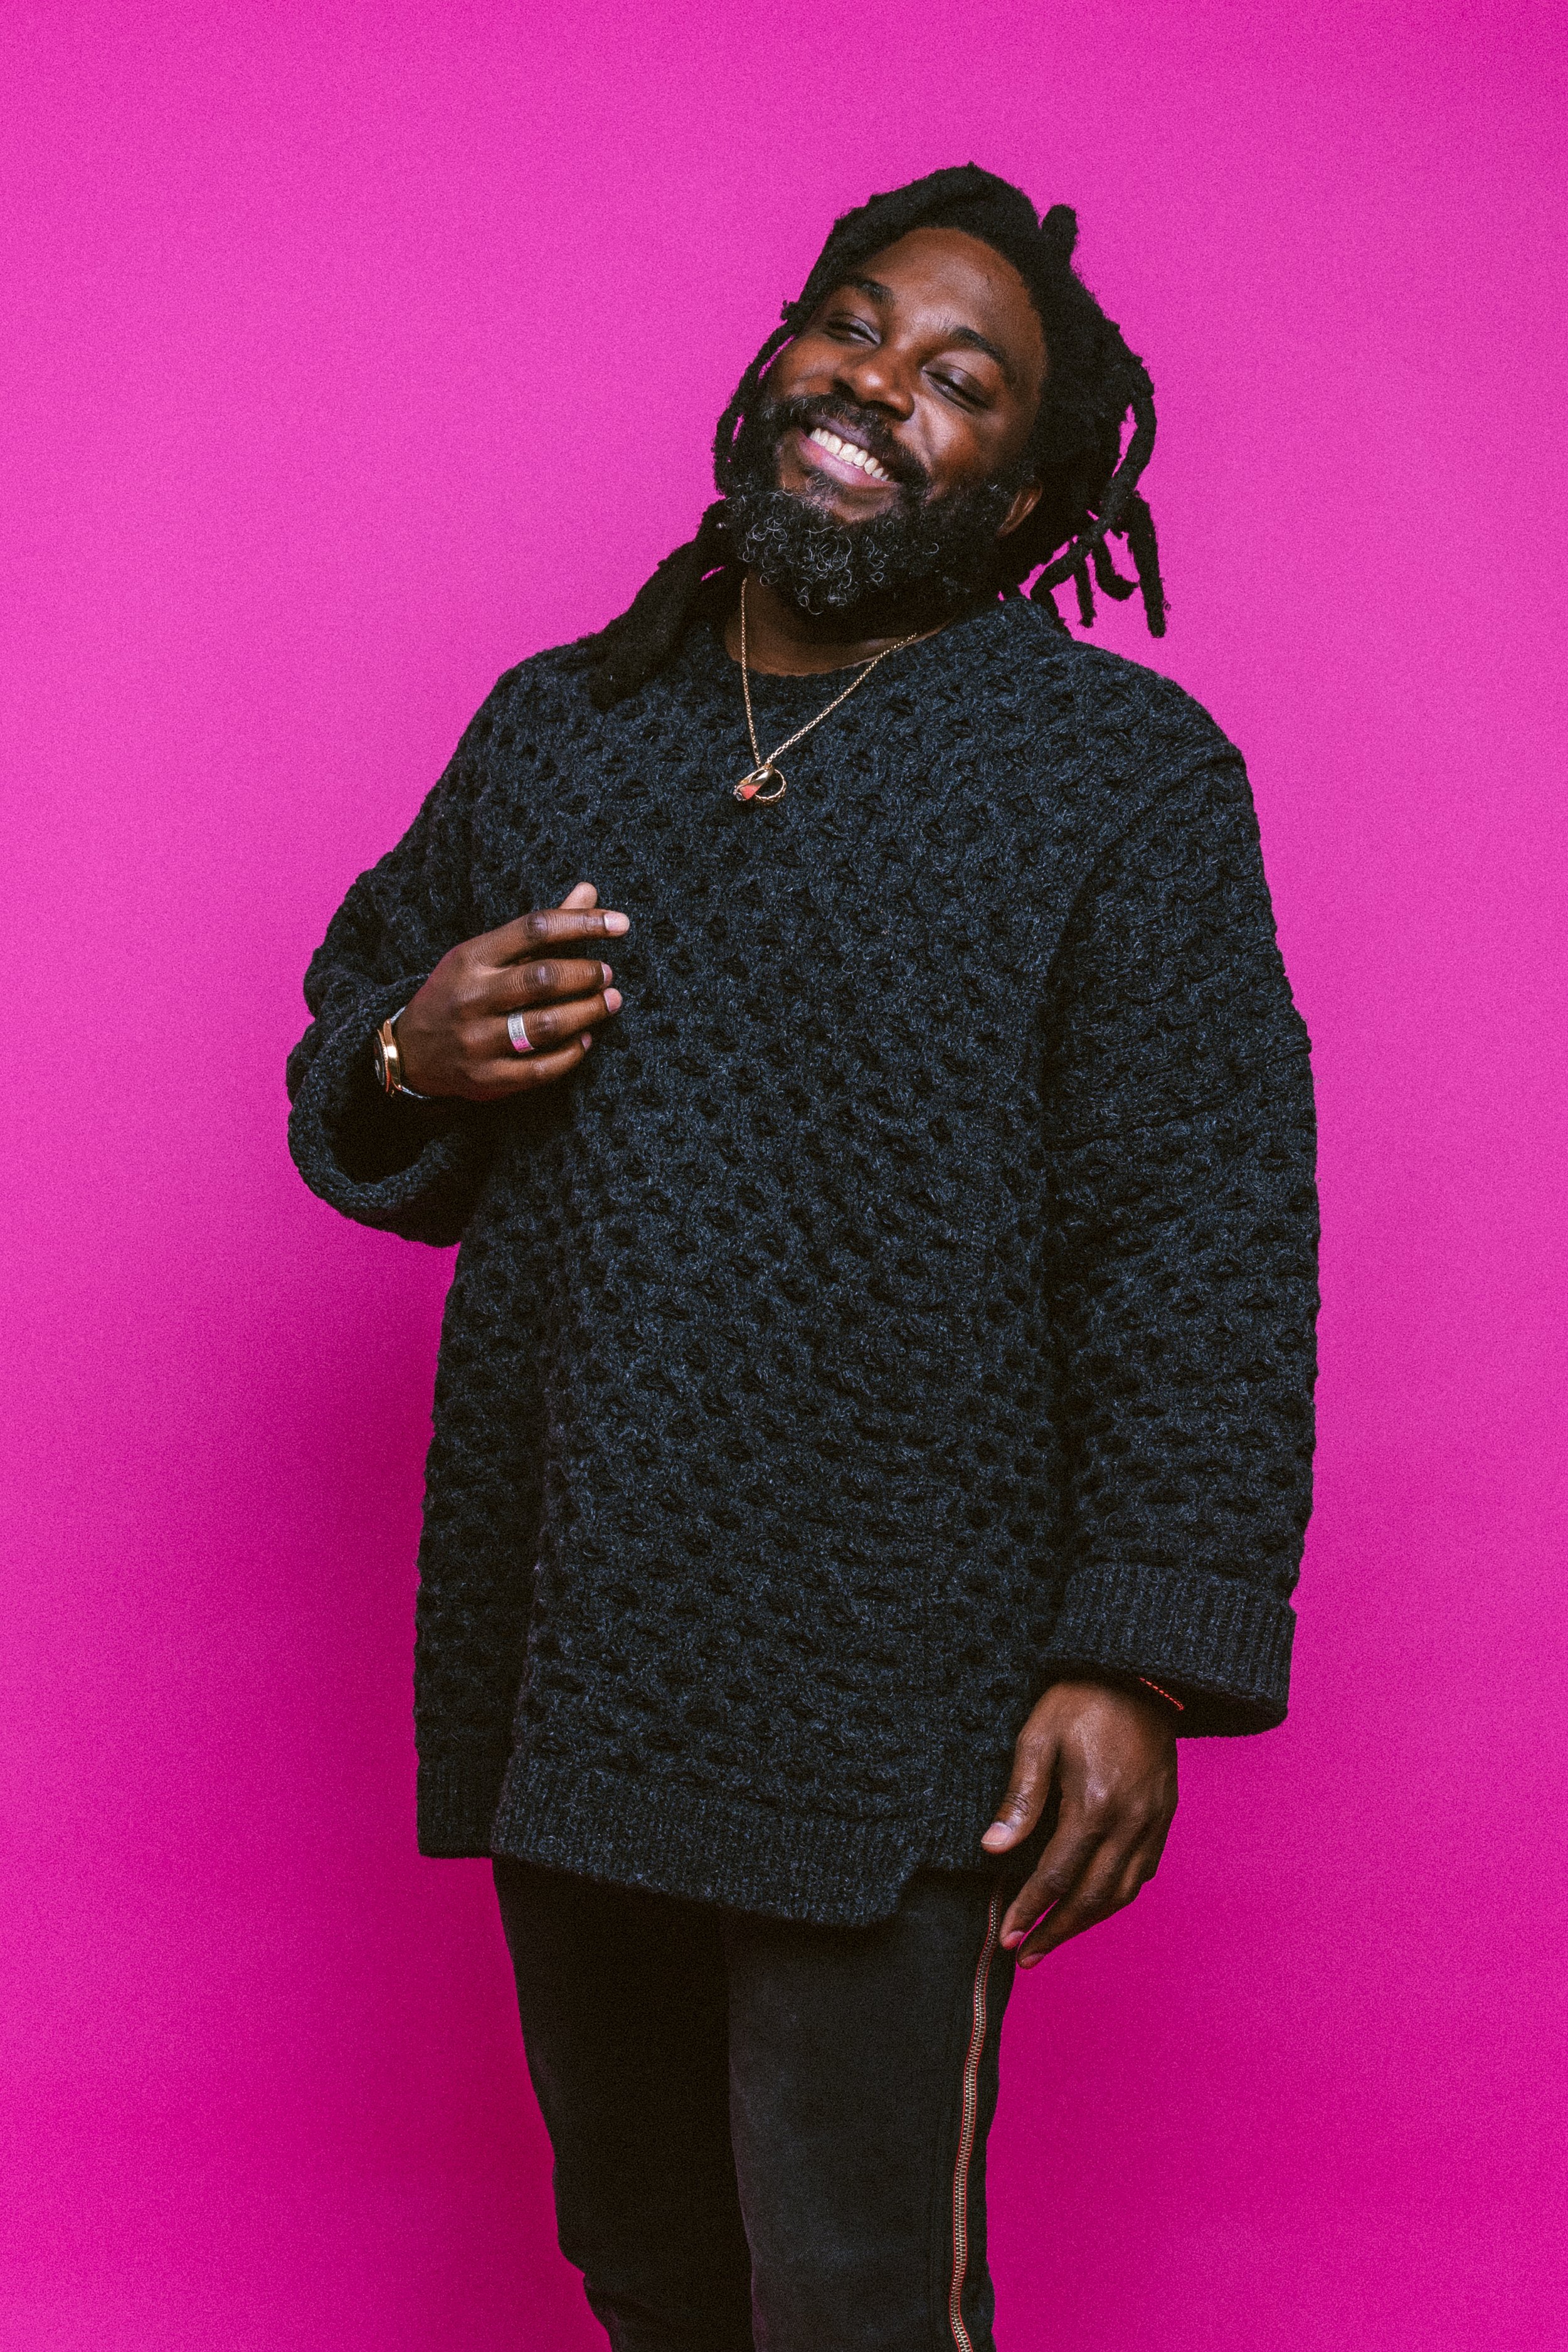 Jason Reynolds, laughing, standing with a pink background behind him